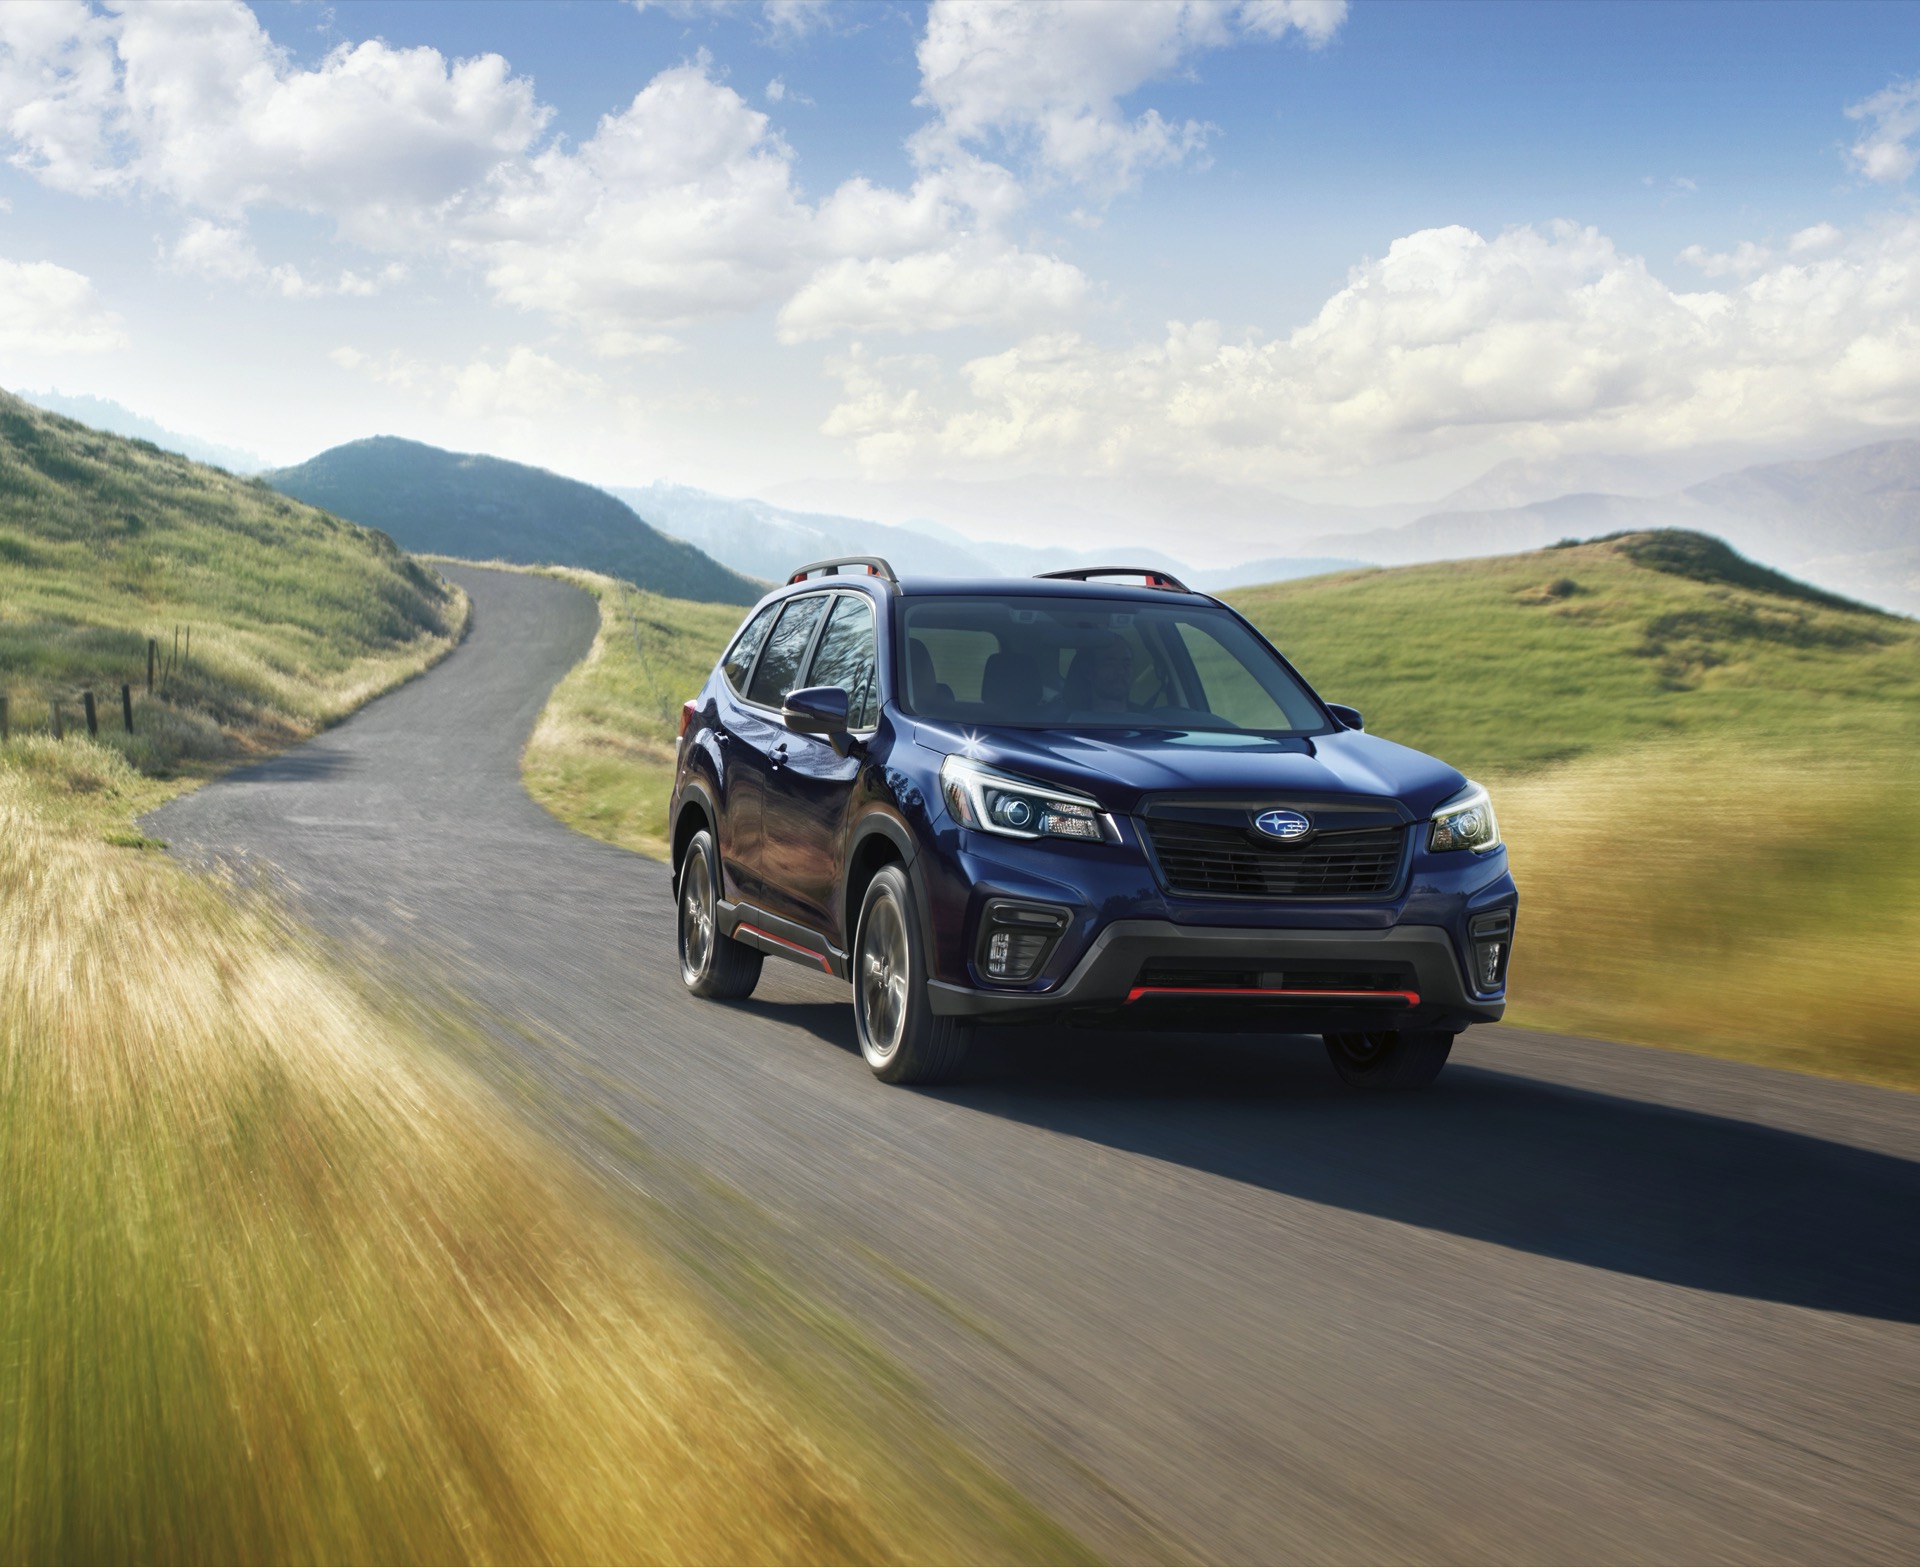 2021 Subaru Forester Suv Adds Safety Gear Costs 25 845 To Start